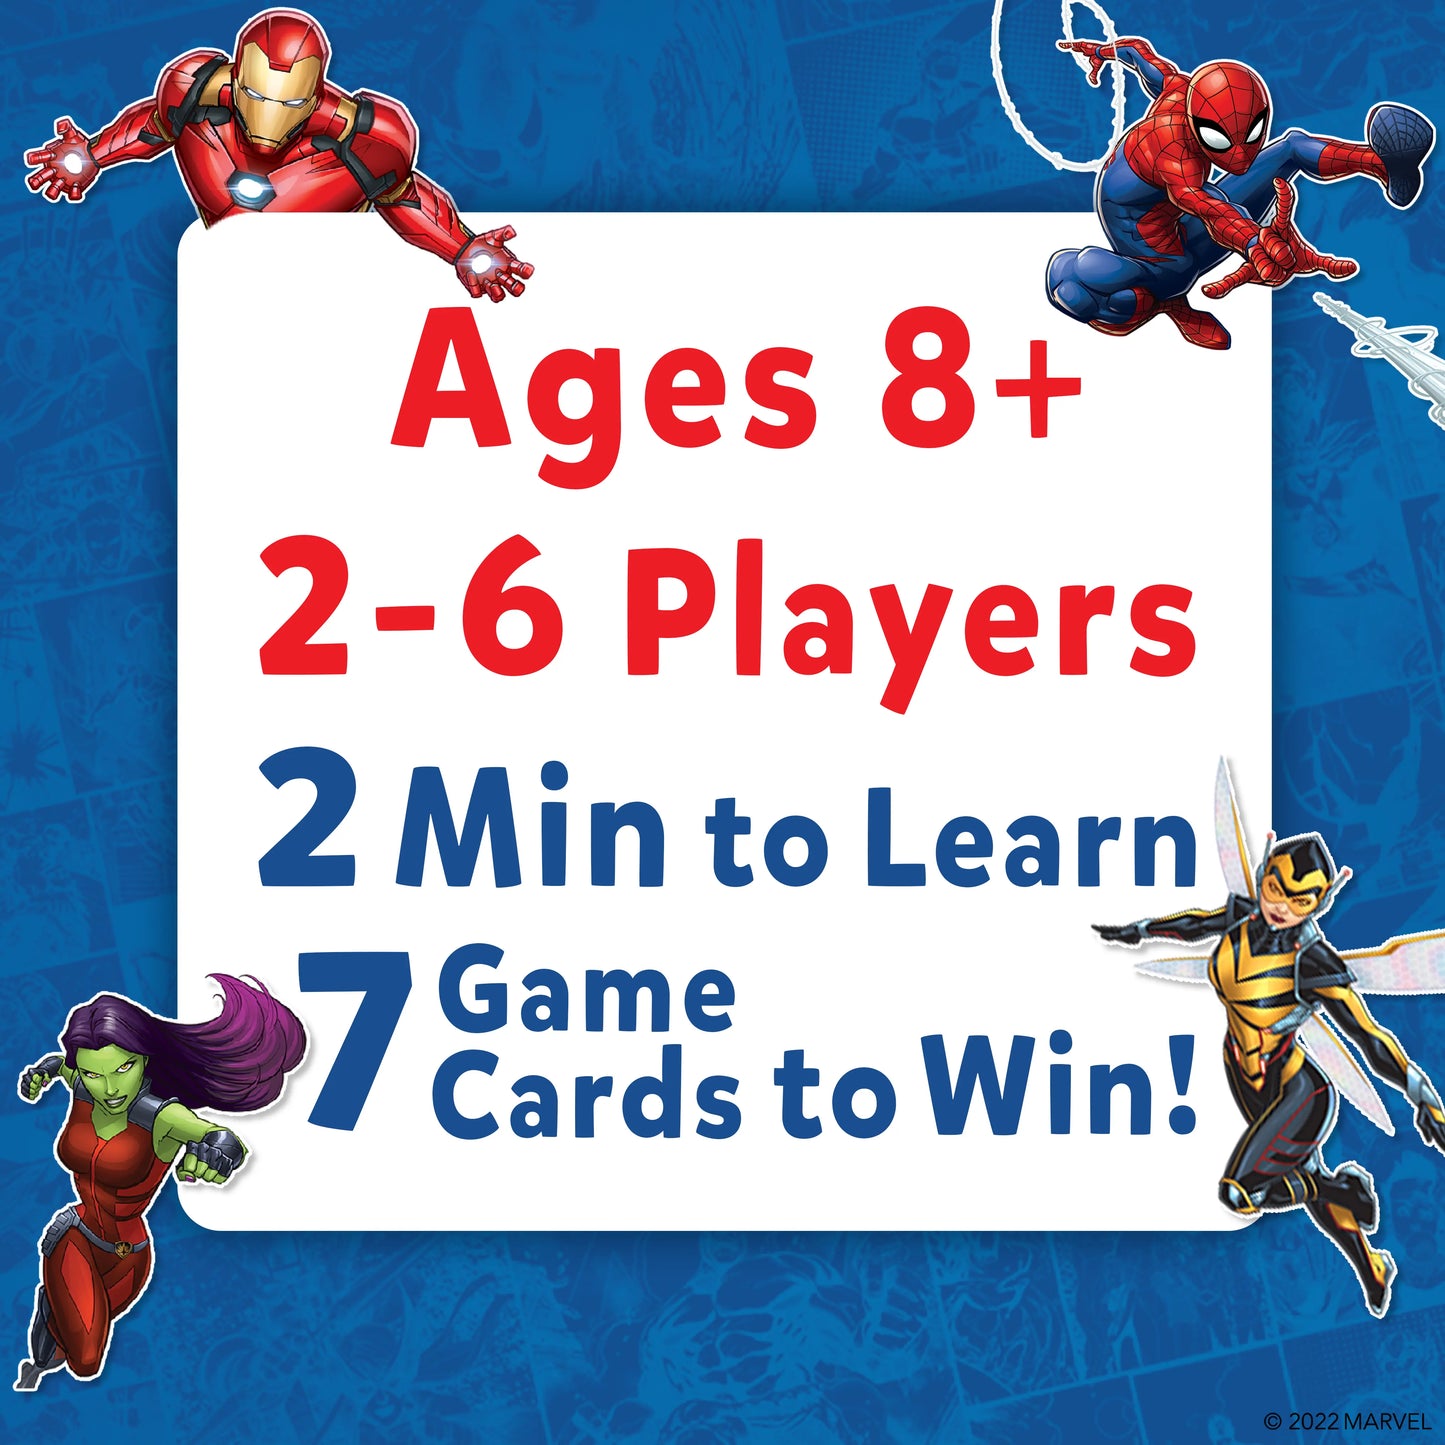 Skillmatics Marvel Card Game - Guess in 10, Gifts for Ages 8 and Up